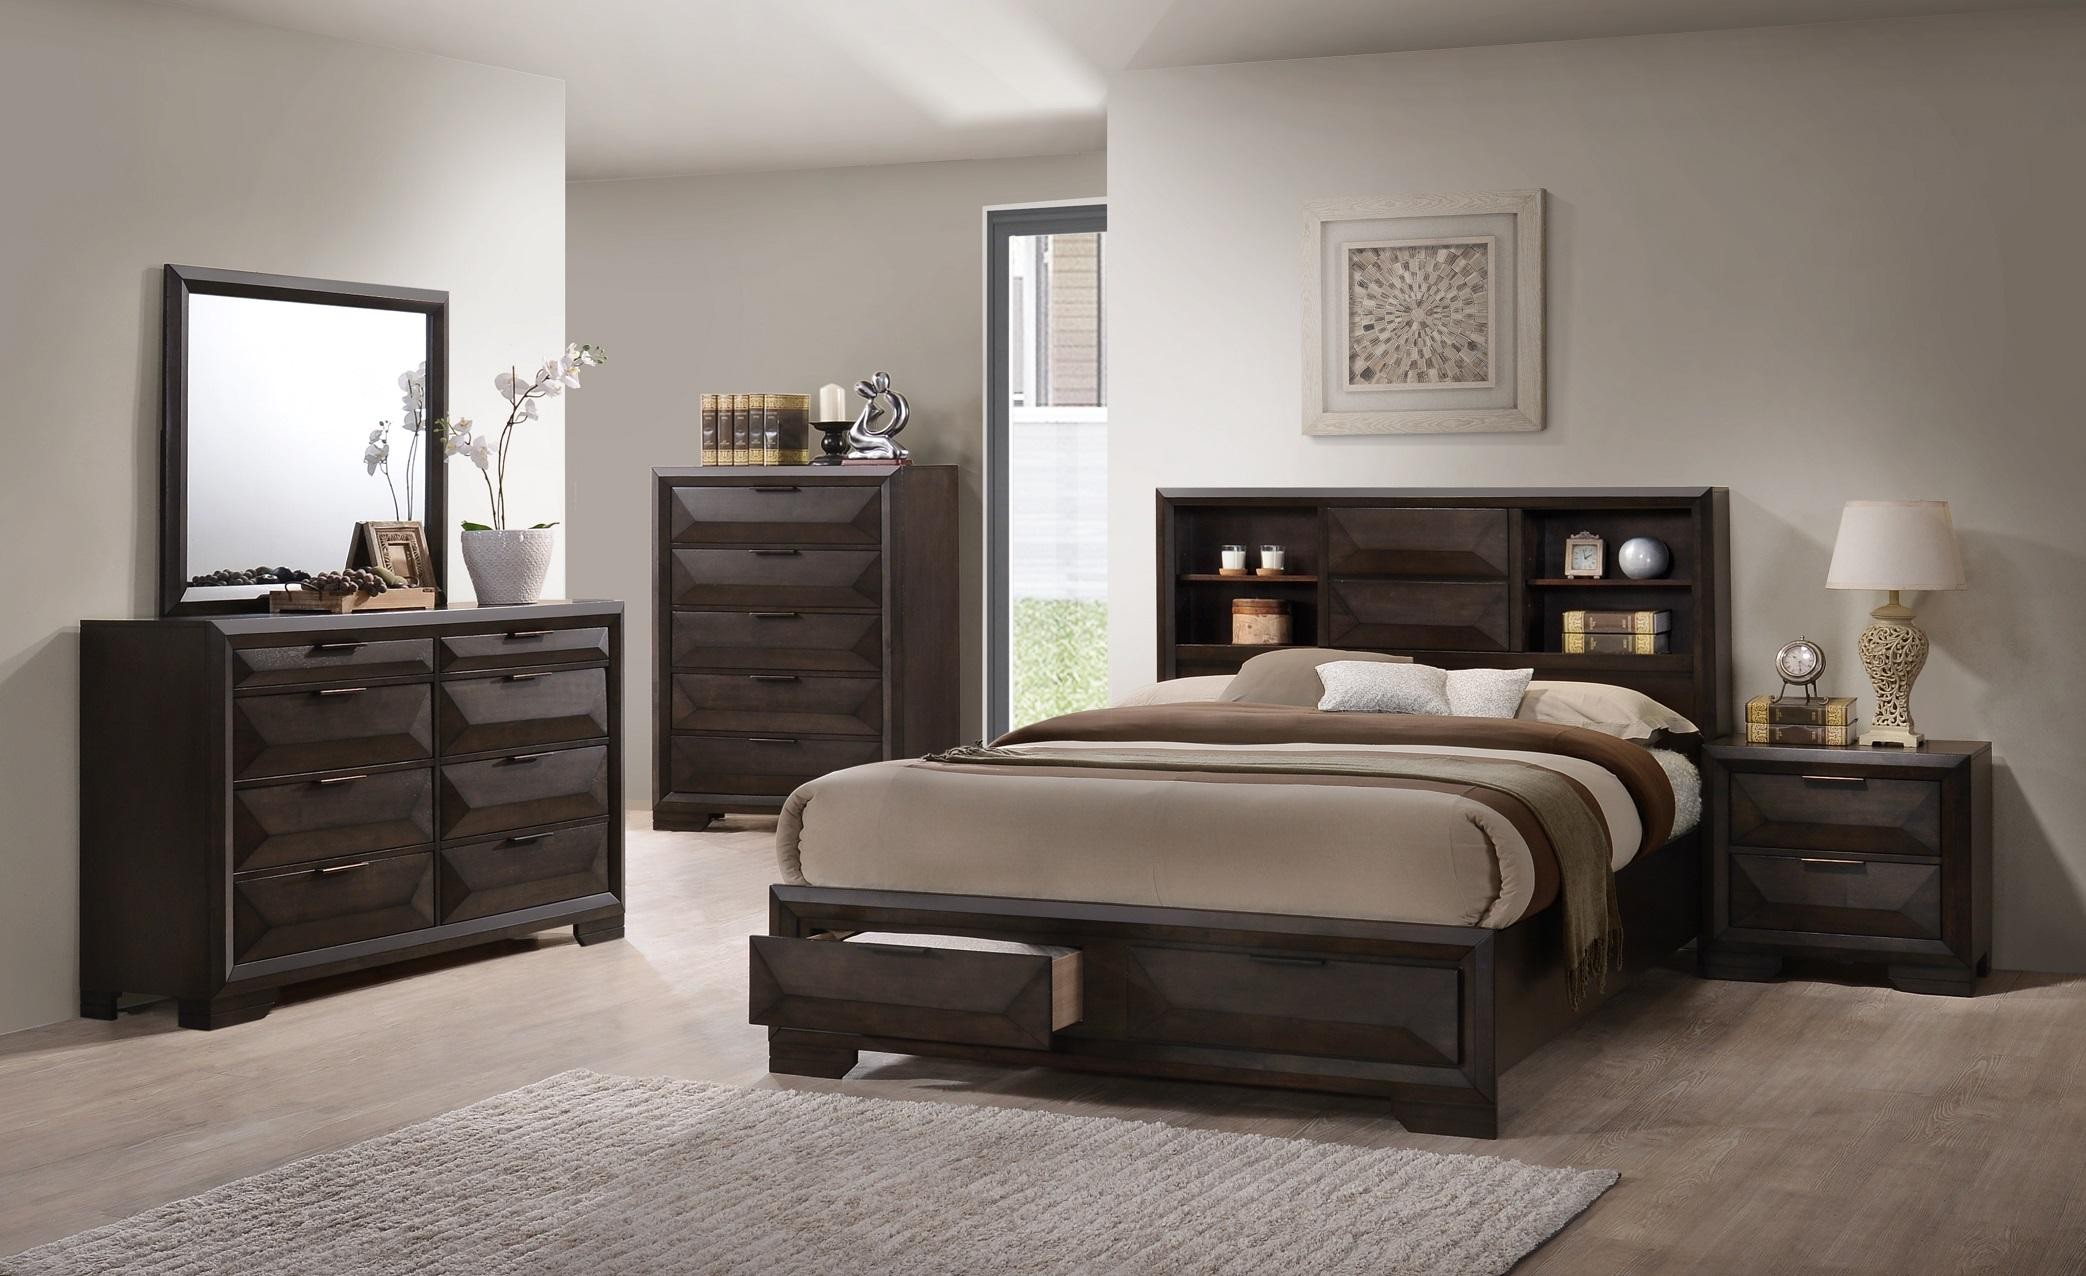 8 Pcs Wooden Bedroom Set With Storage Me 01 971 with regard to size 2086 X 1276